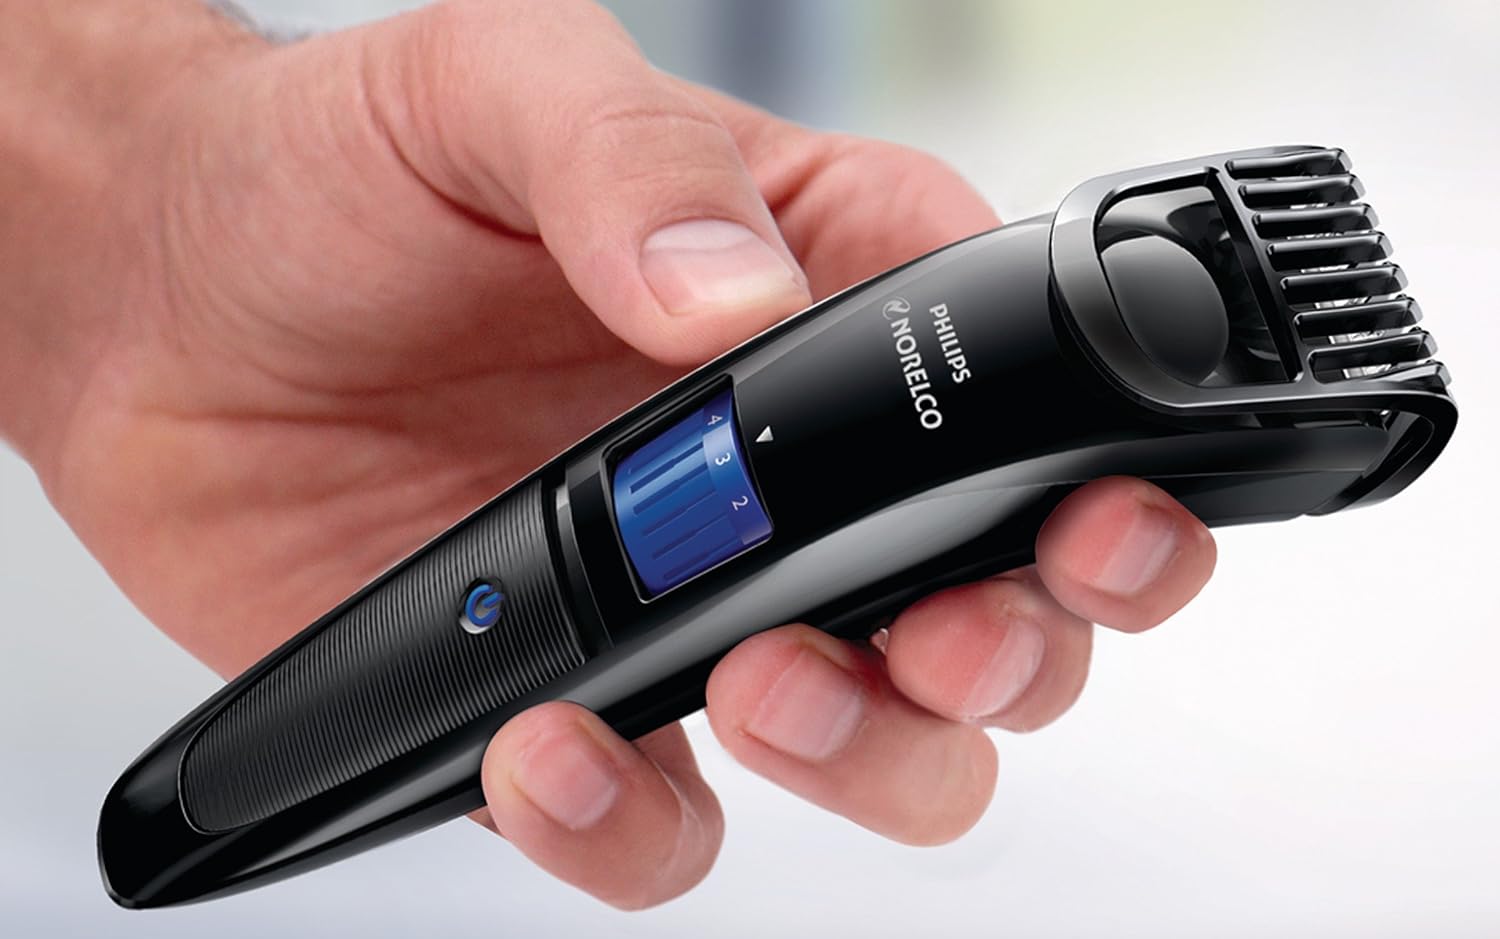 How Long Does a Beard Trimmer Battery Last?